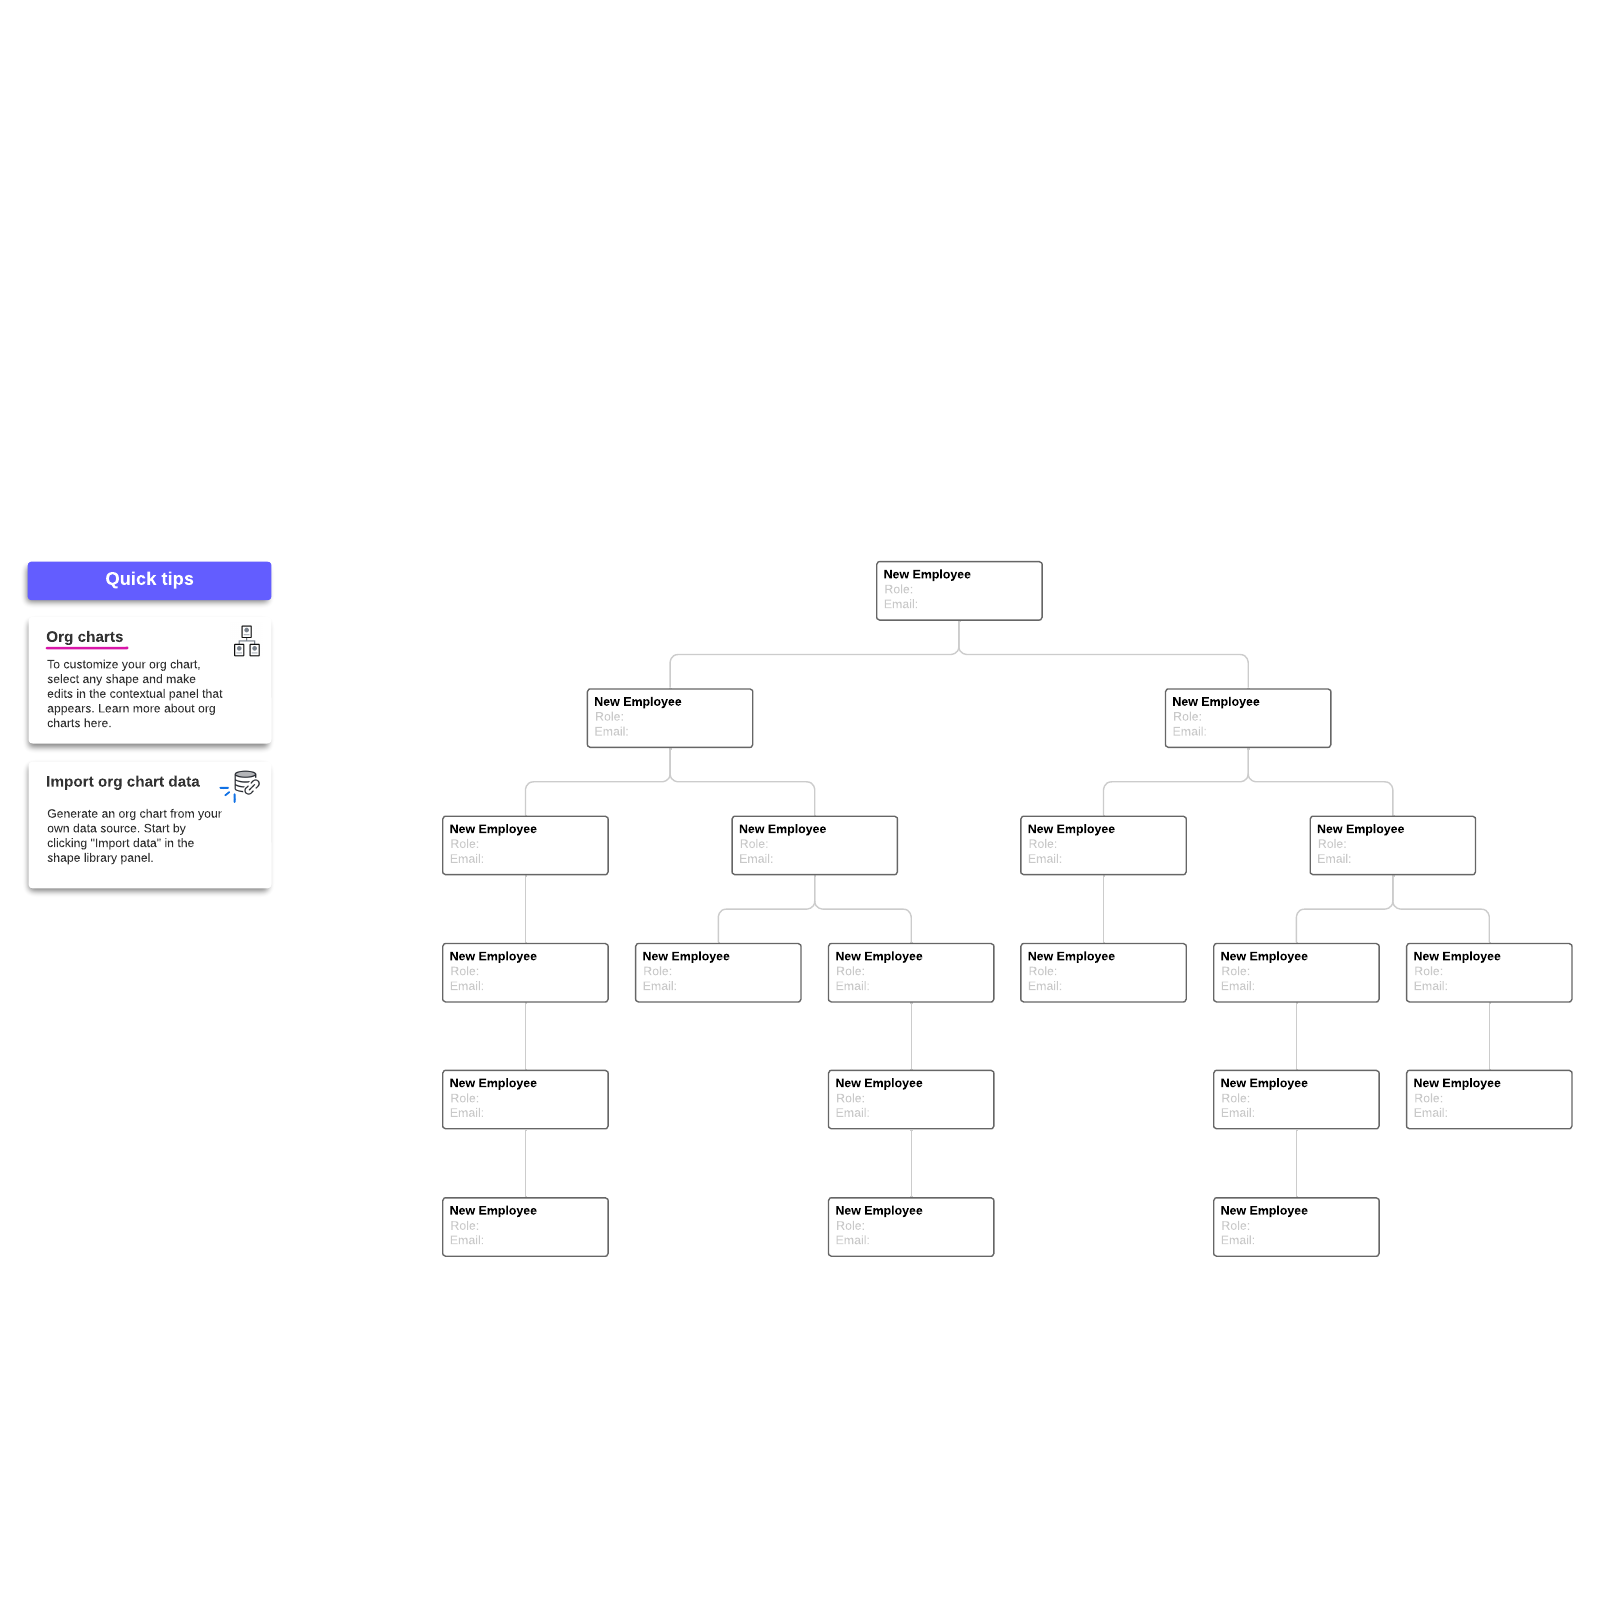 Org chart (name, role, email) example